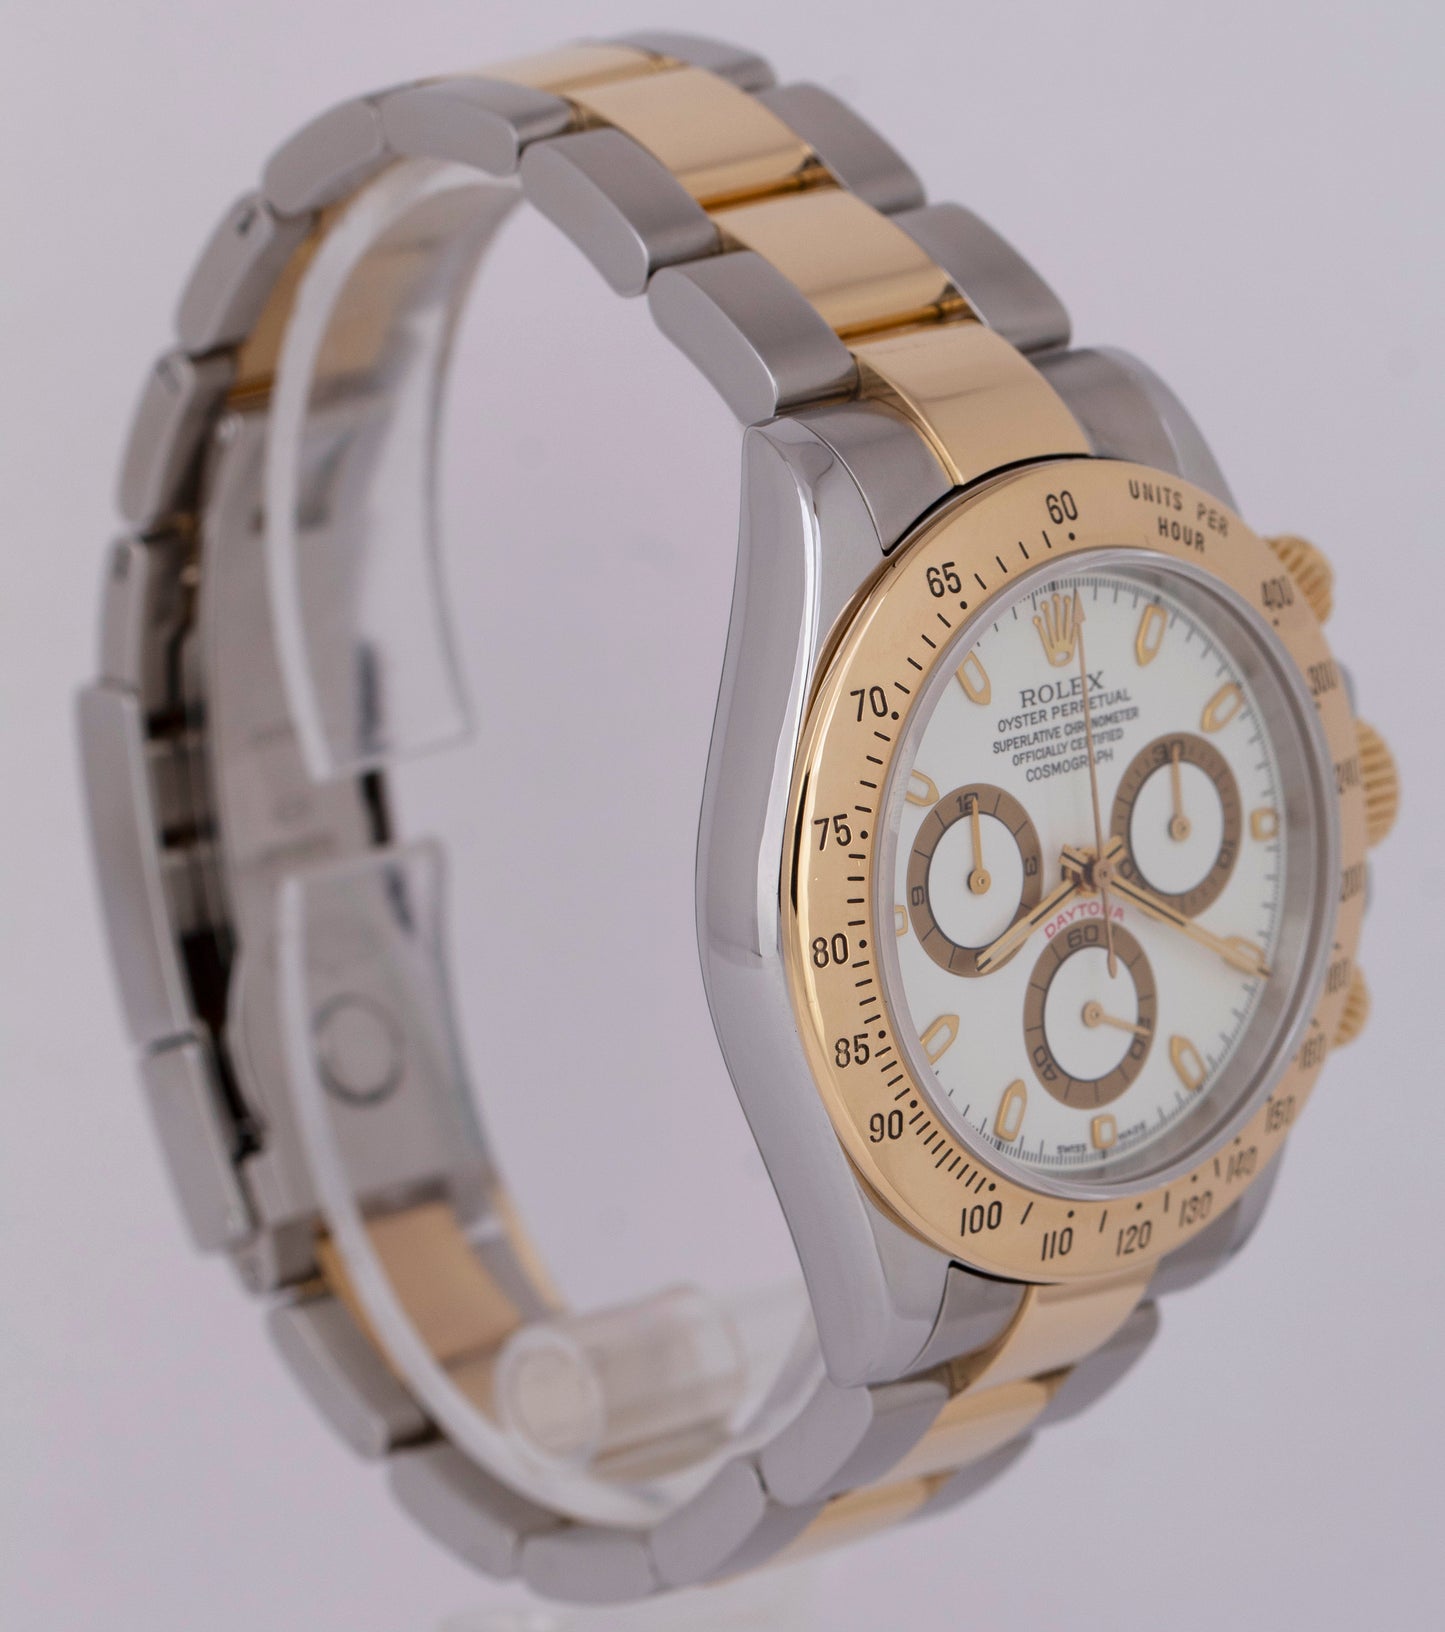 MINT PAPERS Rolex Daytona Cosmograph 40mm White Two-Tone Gold 116523 Watch B+P